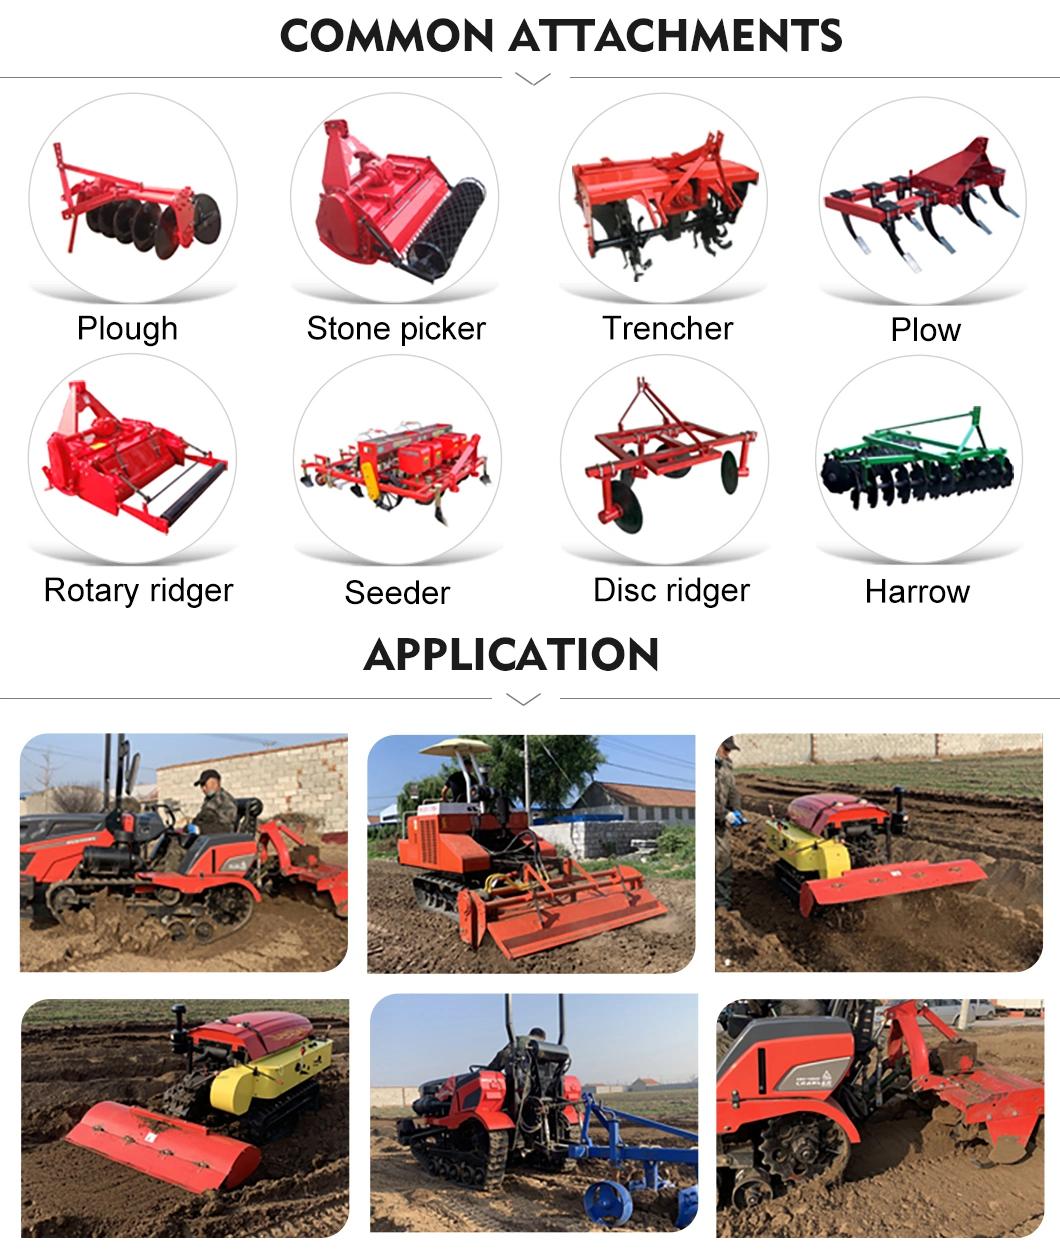 Excellent Production Hydraulic Tracked Tractor Crawler Farm Crawler Tractors for Sale